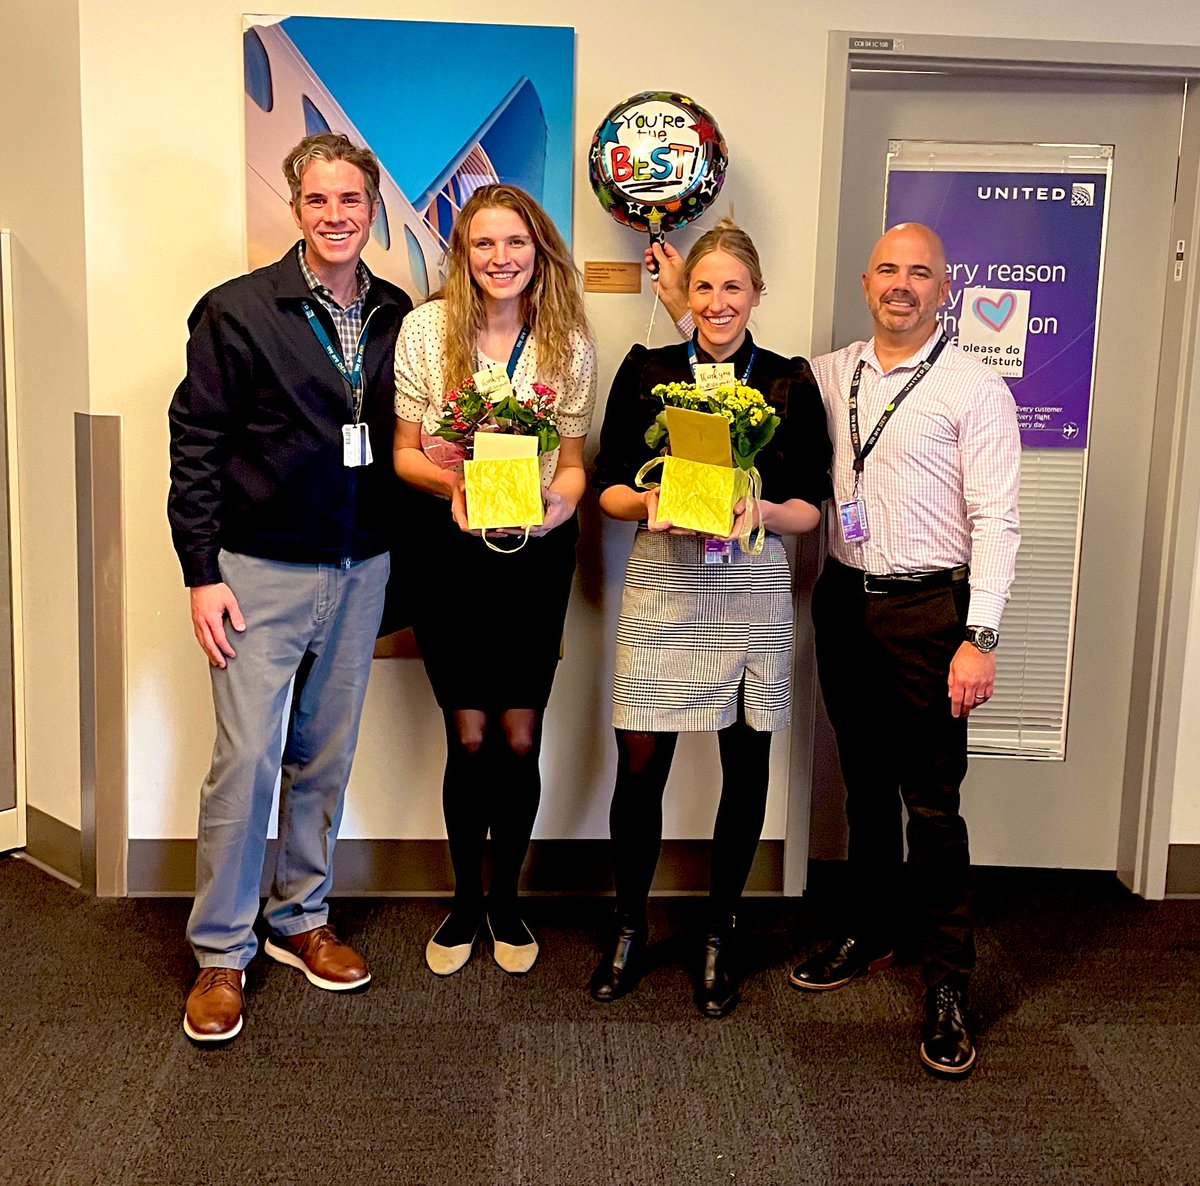 Getting to honor @Laura_United and @MaryUtley18 for all their many contributions to @DENAirport this week for #AdministrativeProfessionalDay was a total joy. Thank you both for all you do!